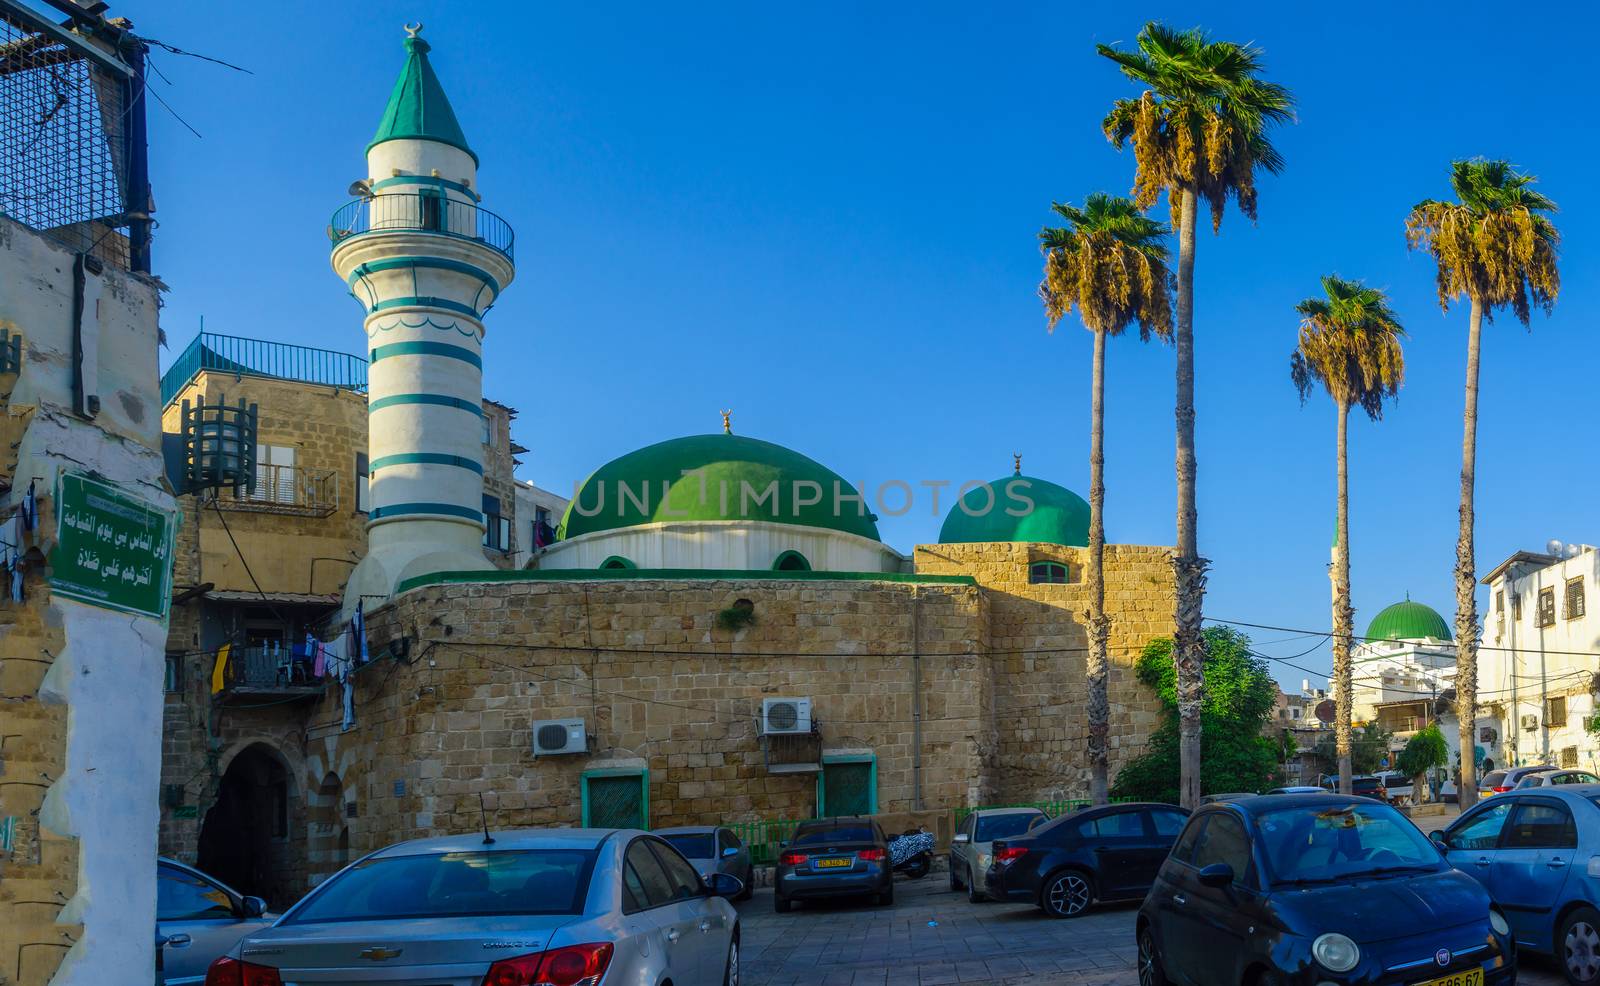 Acre, Israel - September 14, 2020: View of the E-Zaitune Mosque, in the old city of Acre (Akko), Israel